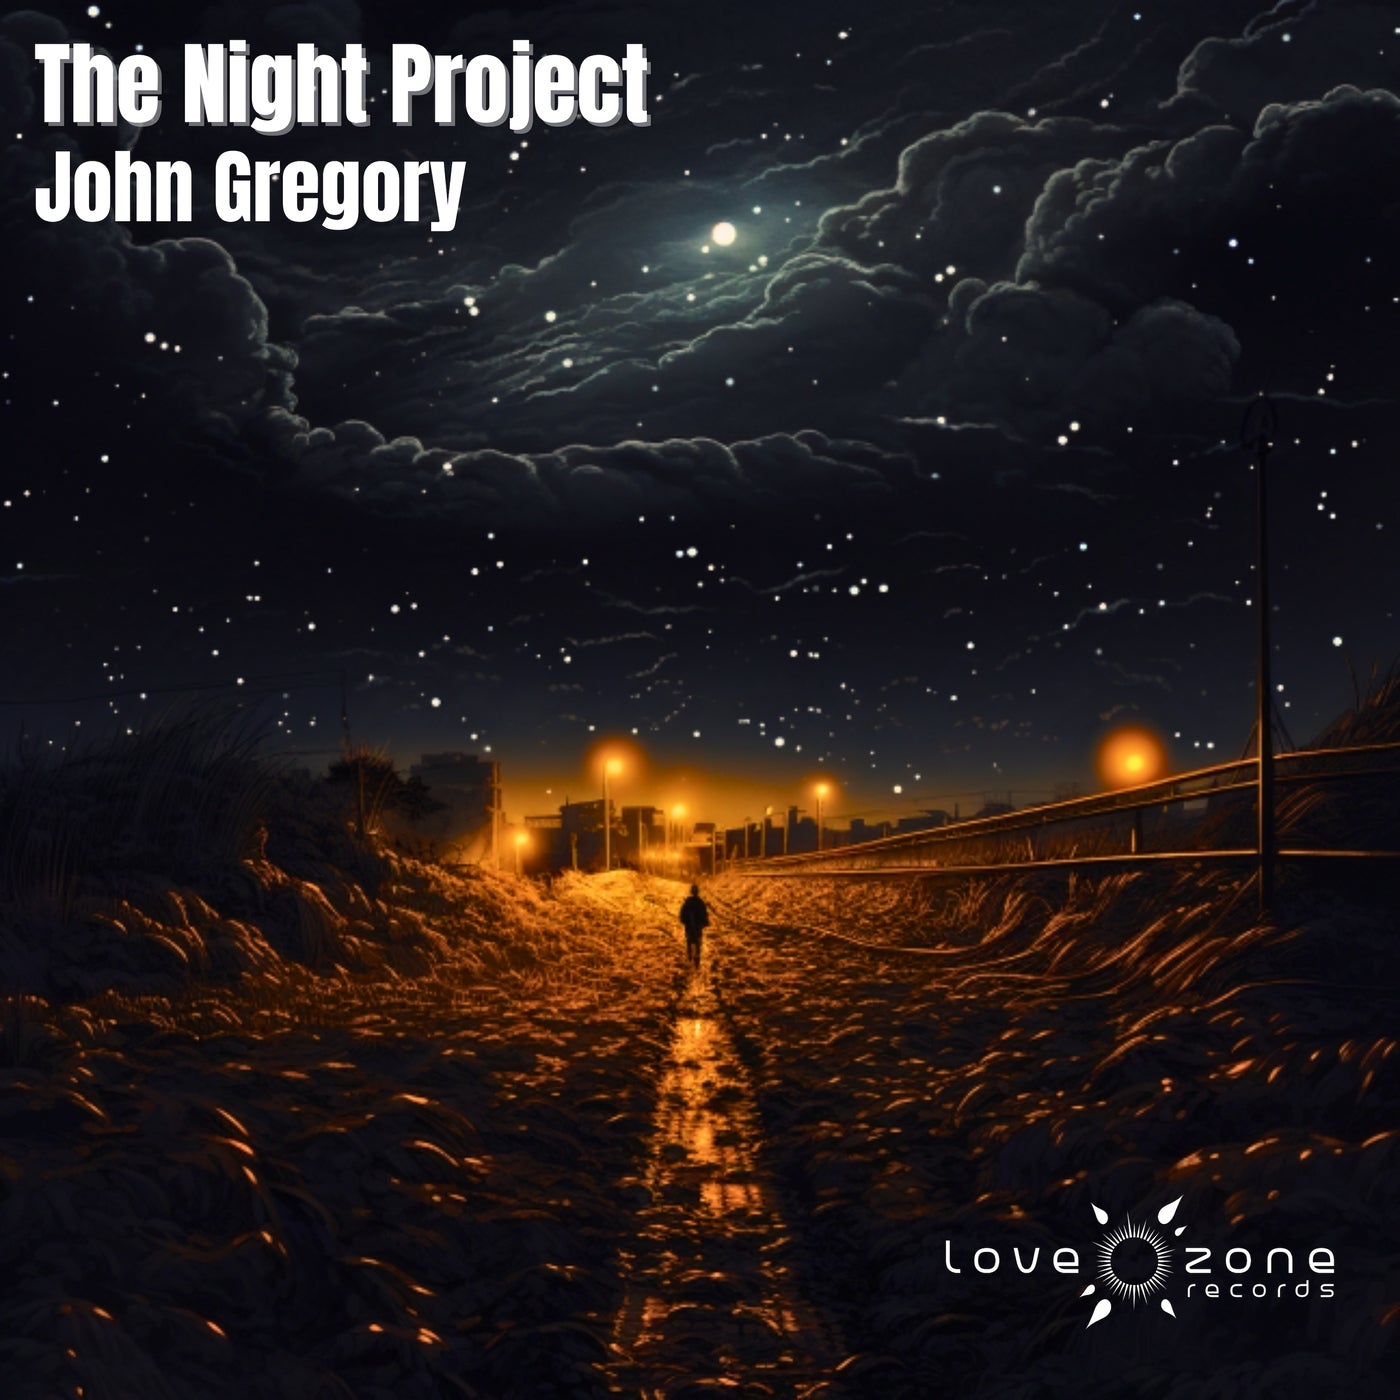 The Night Project